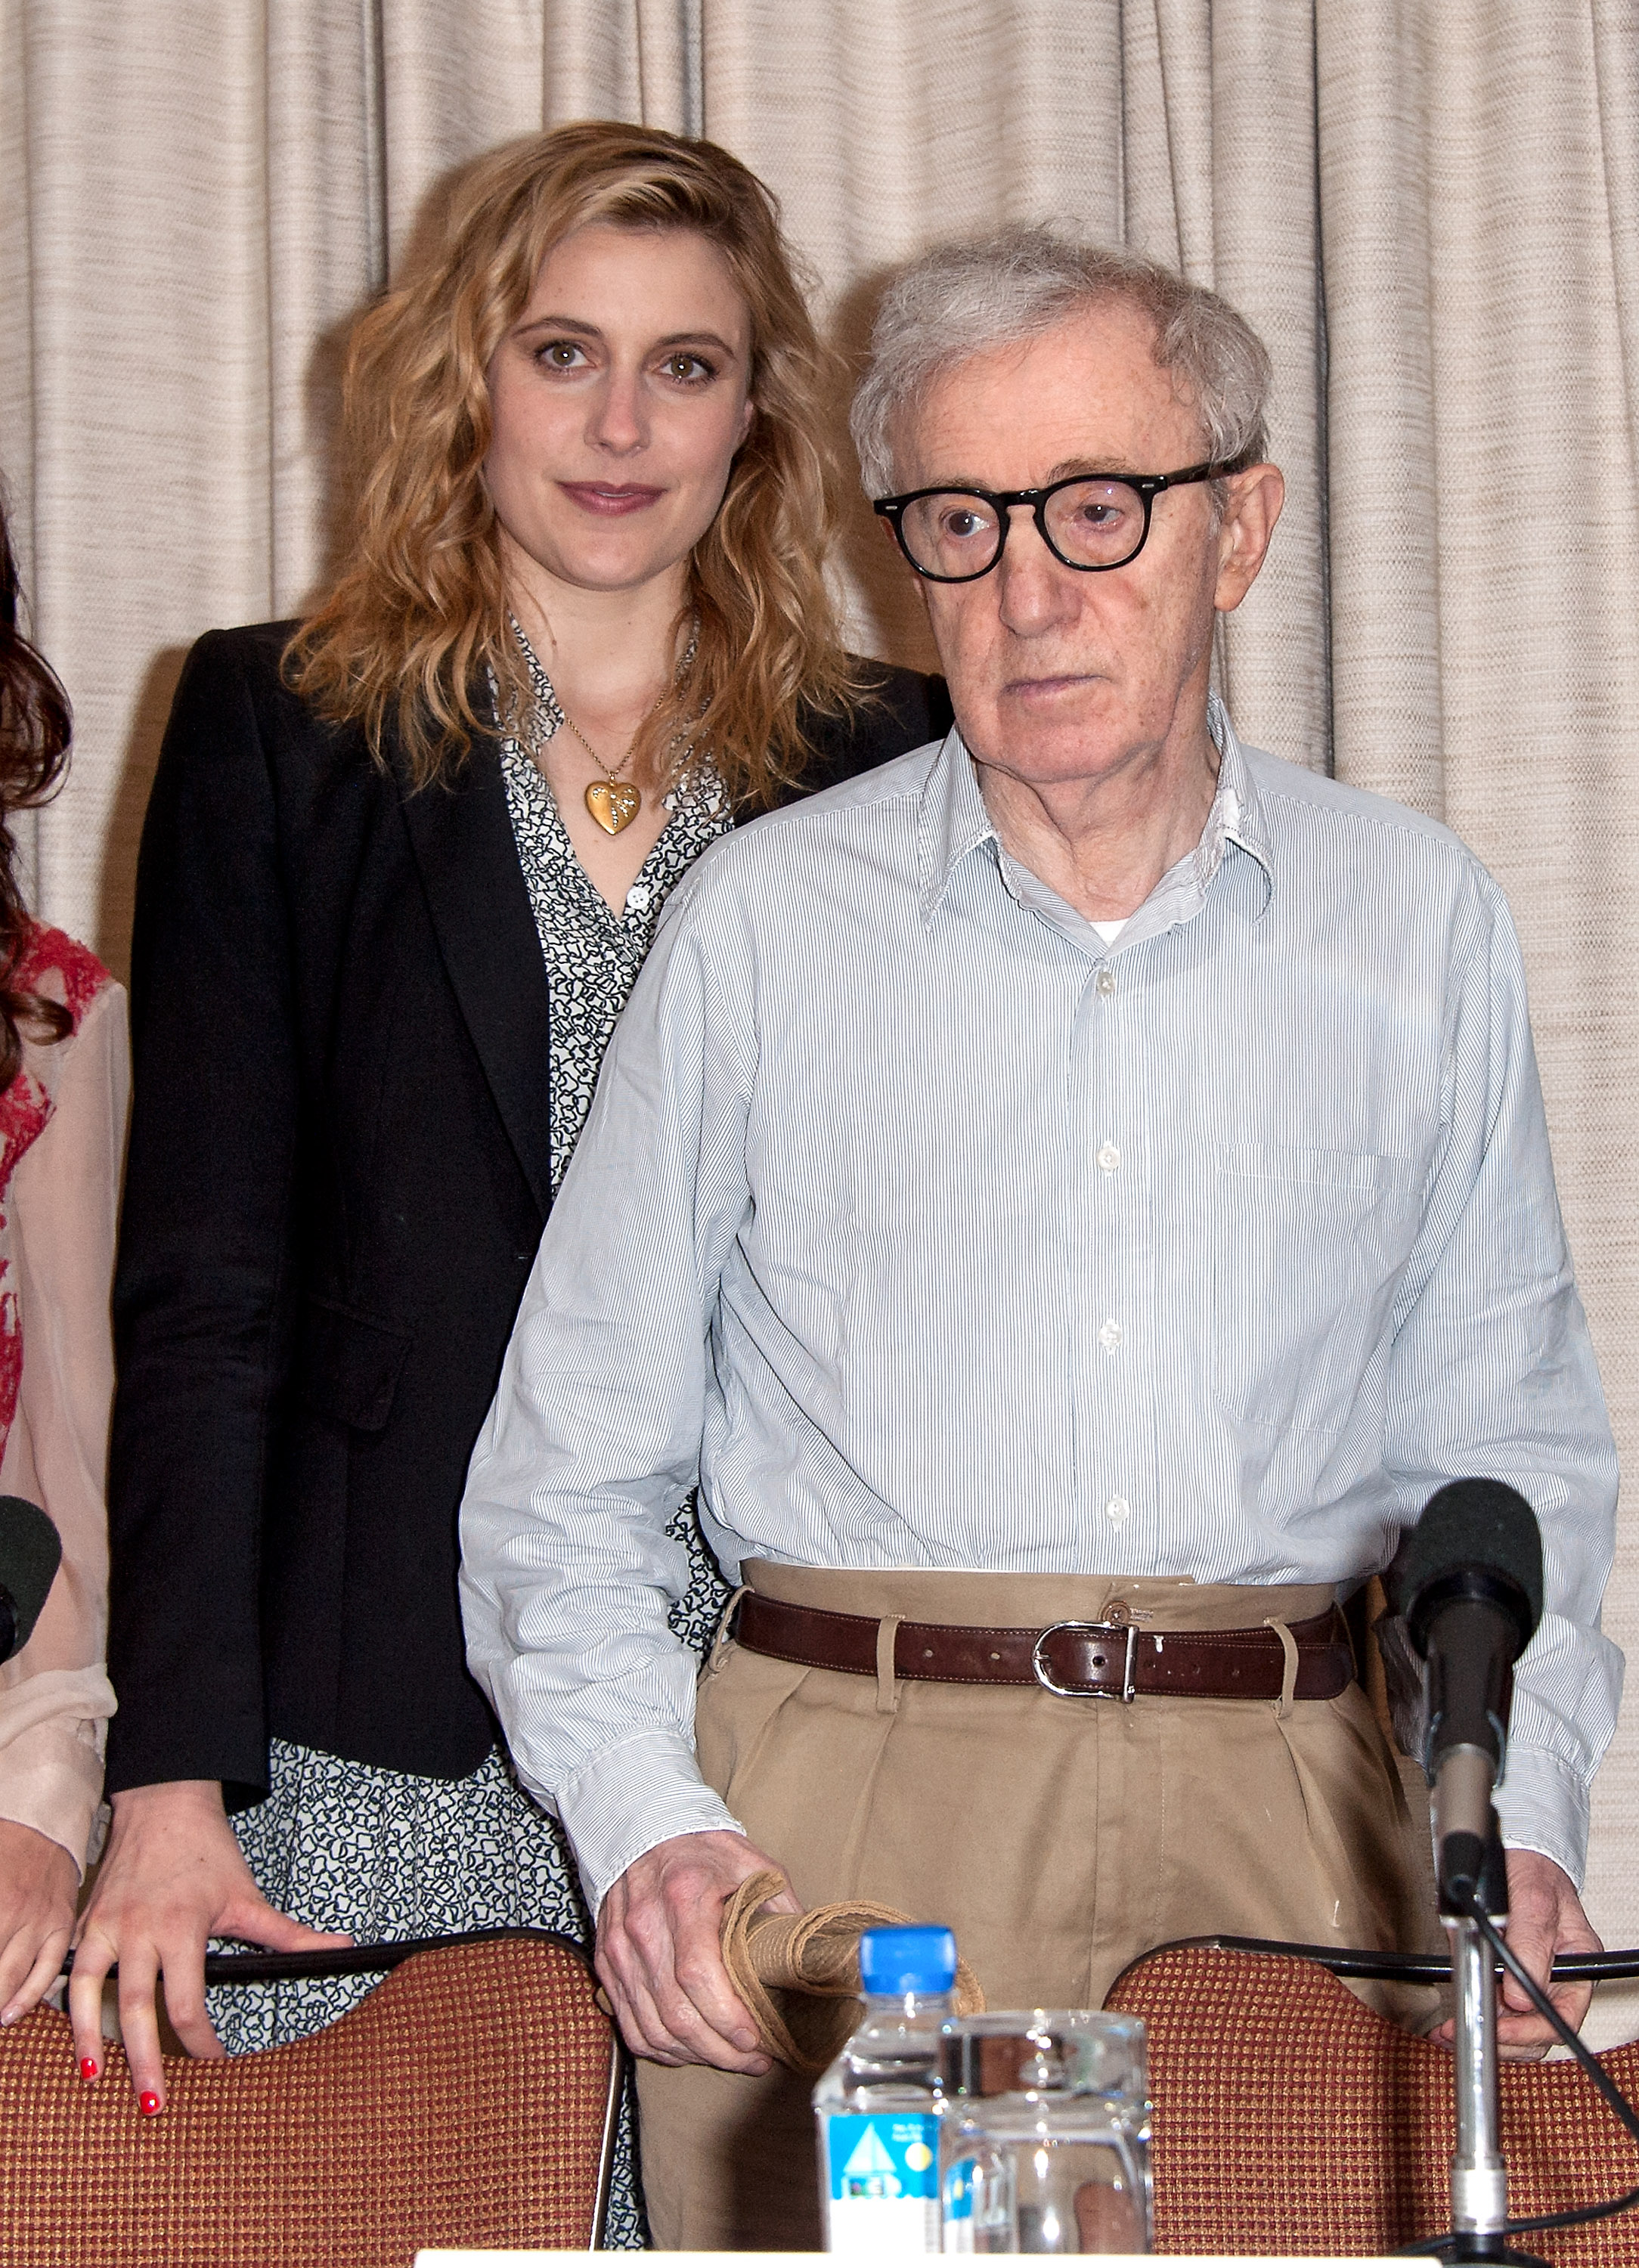 Greta Gerwig (L) and Woody Allen attend the "To Rome With Love" press conference at the Loews Regency Hotel Ballroom on June 19, 2012 in New York City.  (Photo by D Dipasupil/FilmMagic) (D Dipasupil&mdash;FilmMagic)